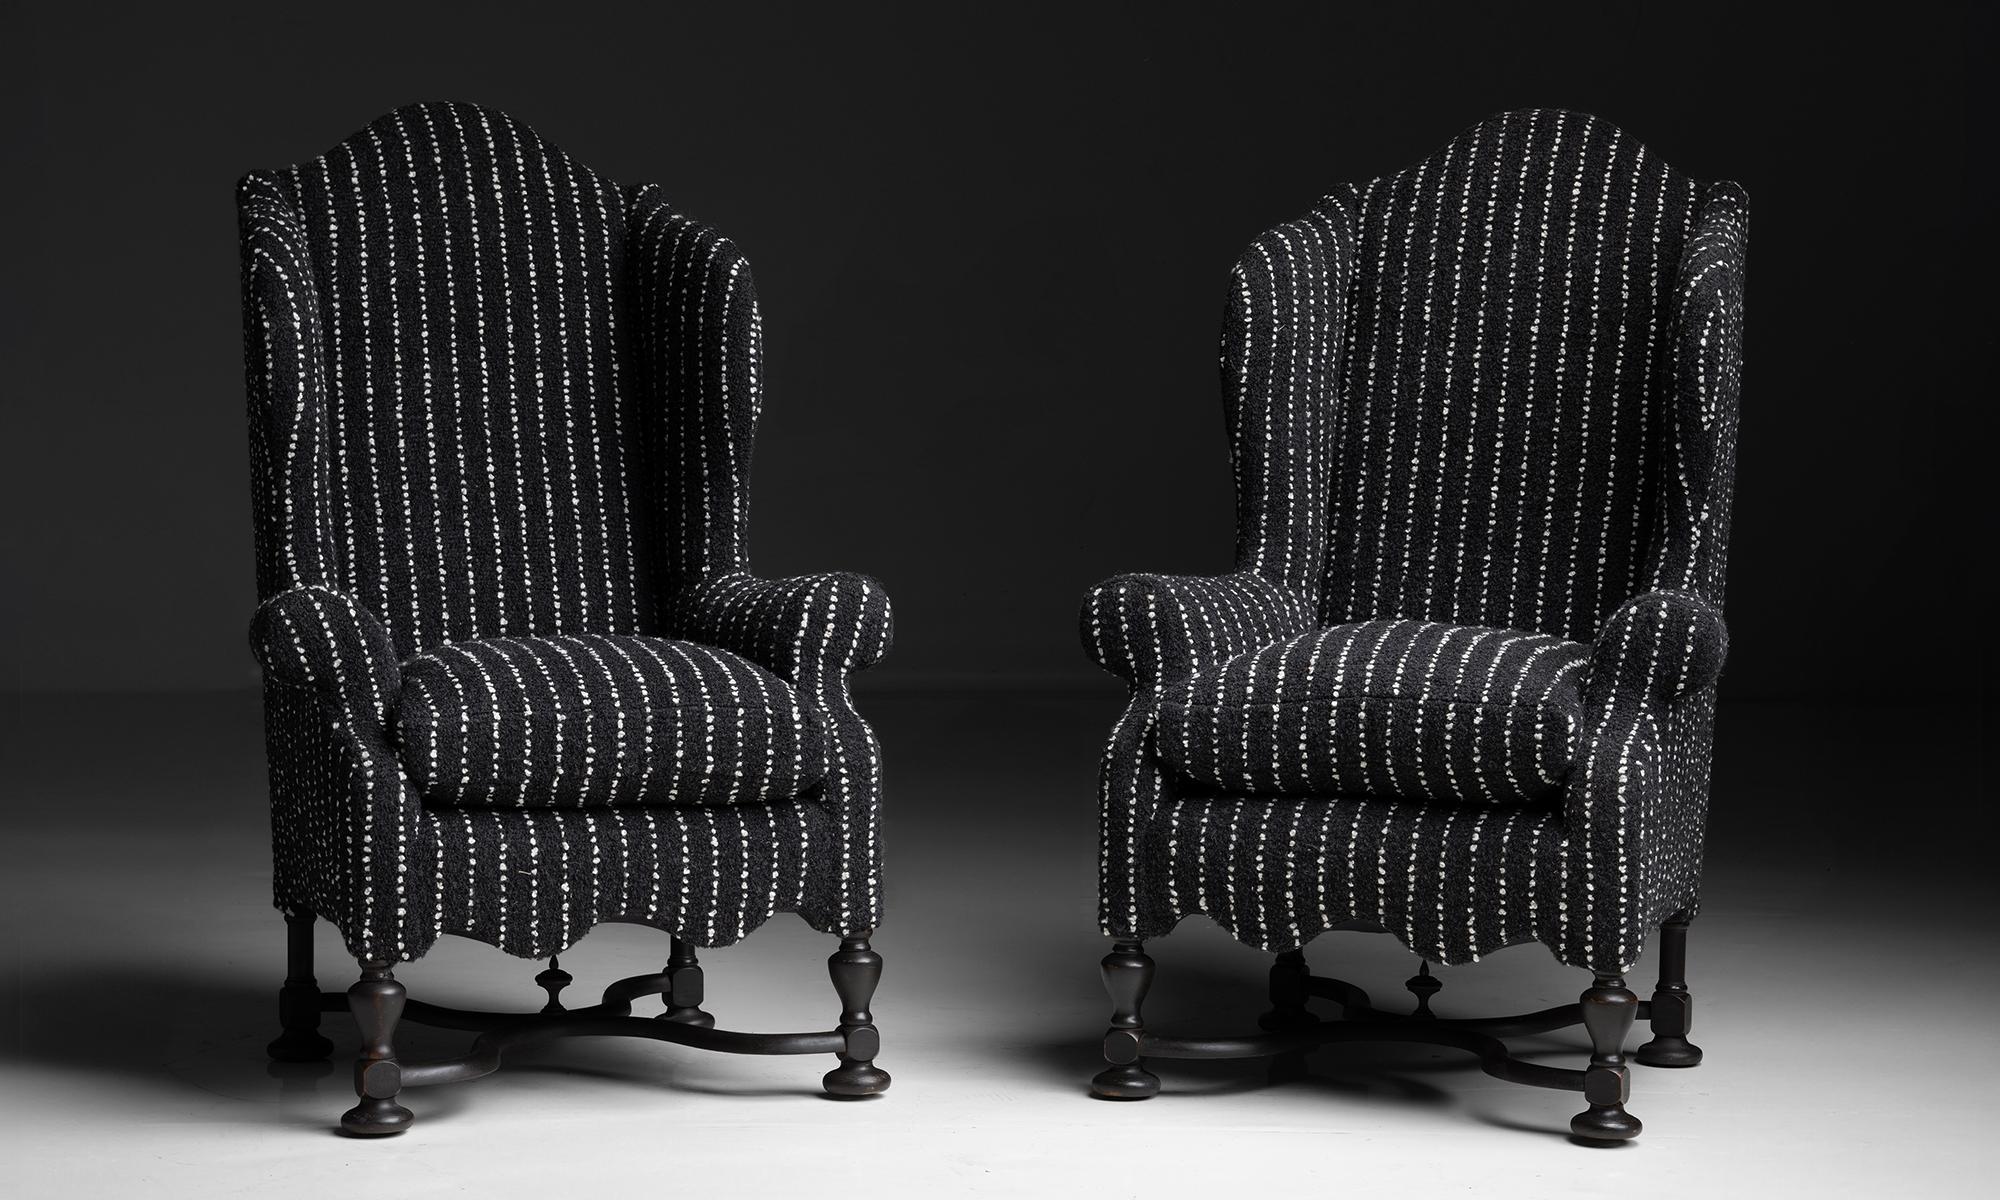 William & Mary Wingback Chairs in Rosemary Hallgarten Fabric
England circa 1890
Antique frames newly upholstered in chalk stripe alpaca blend by Rosemary Hallgarten.
33.5”w x 33”d x 51.5”h x 23”seat